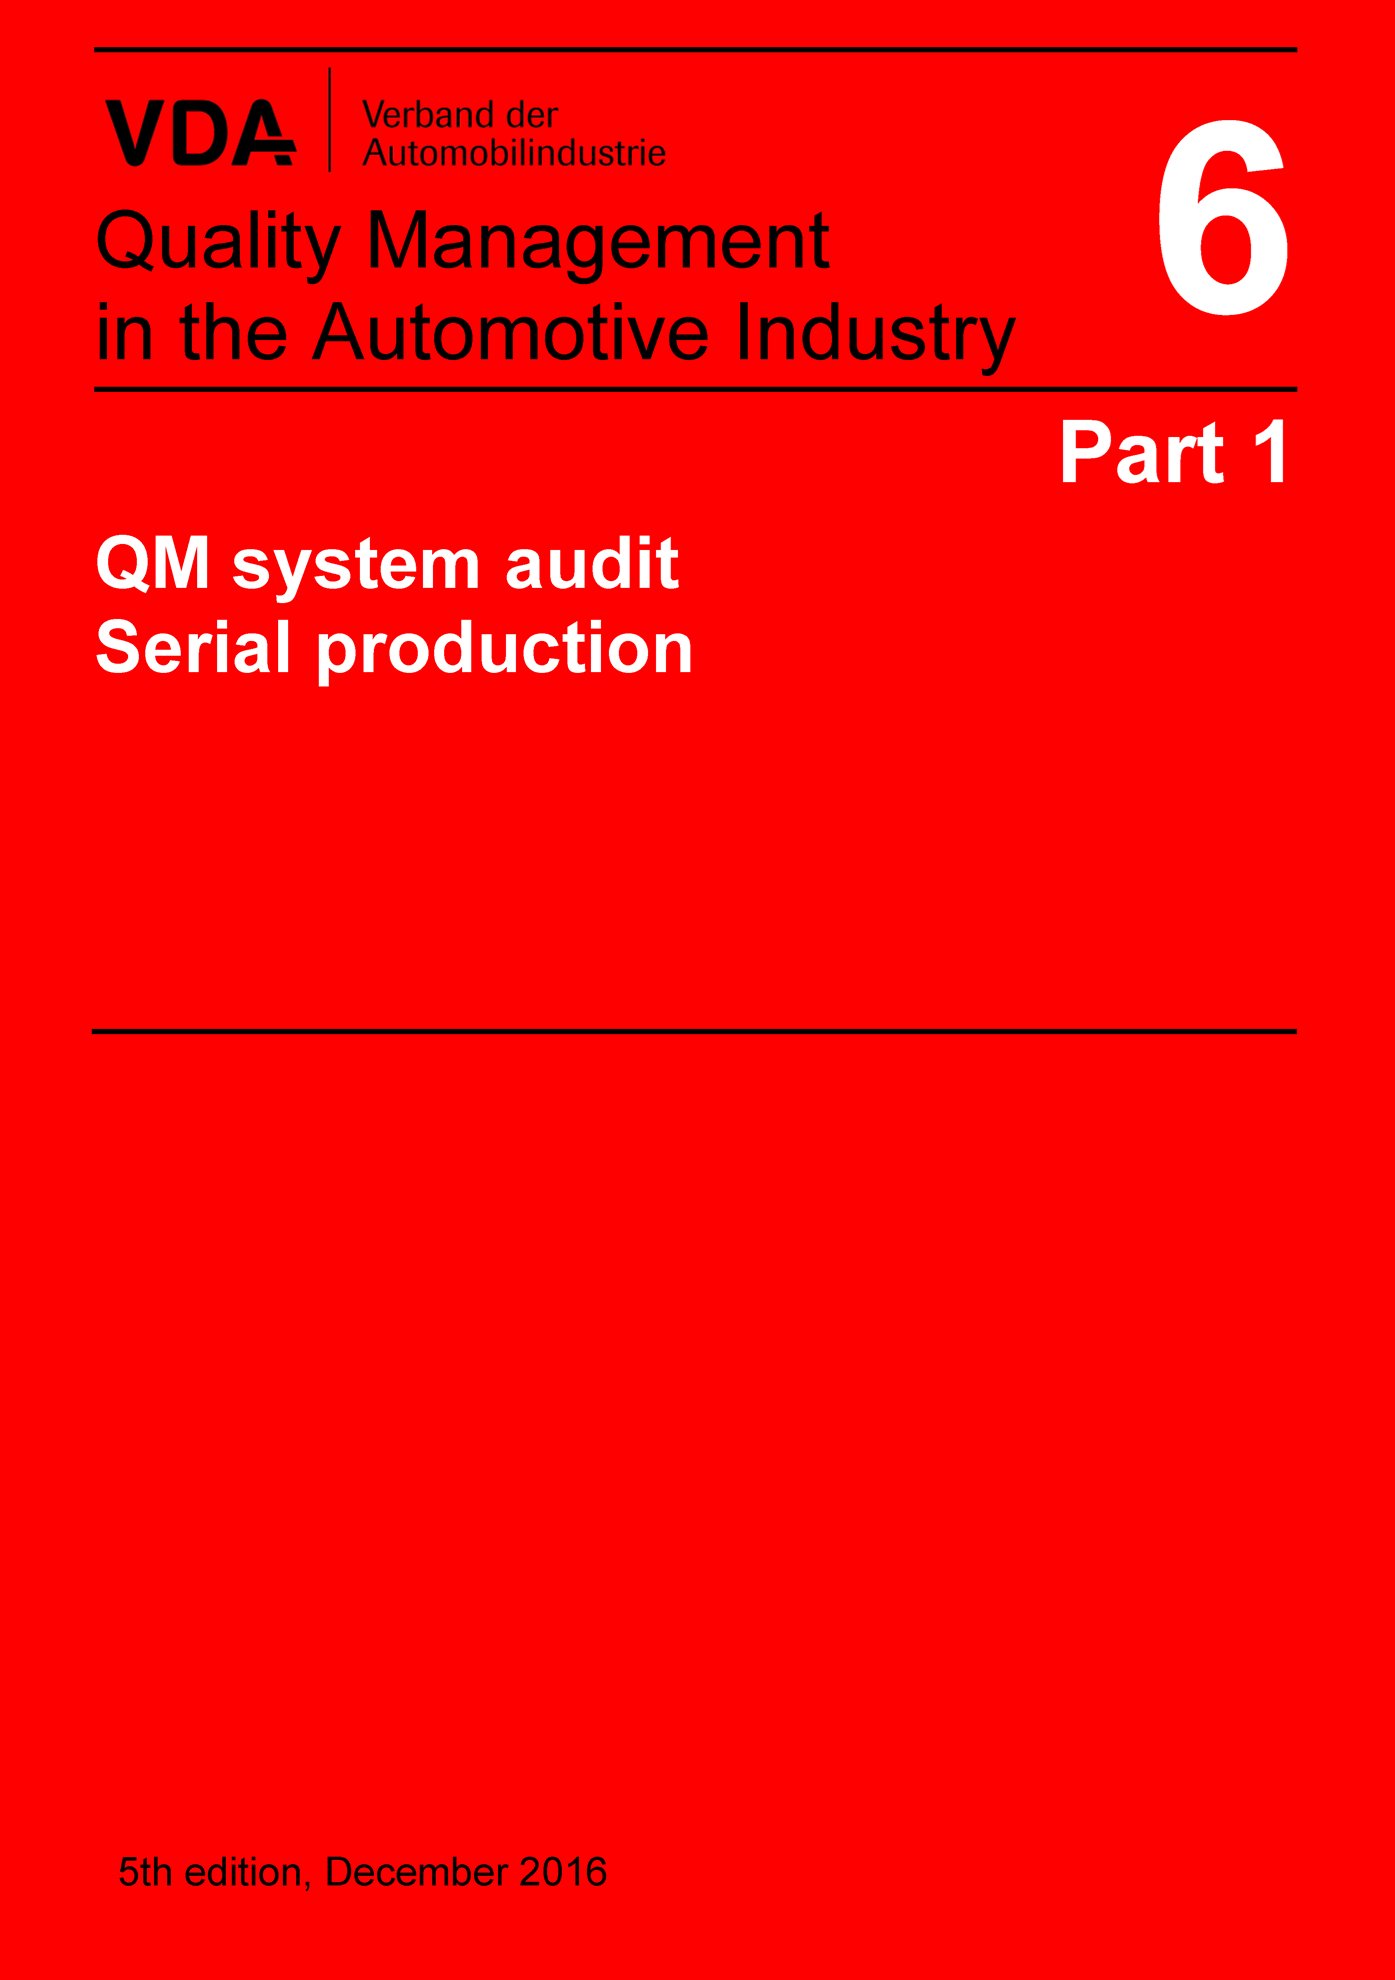 Publikace  VDA Volume 6 Part 1_
 QM-Systemaudit Serial production 
 5th edition, December 2016 1.12.2016 náhled